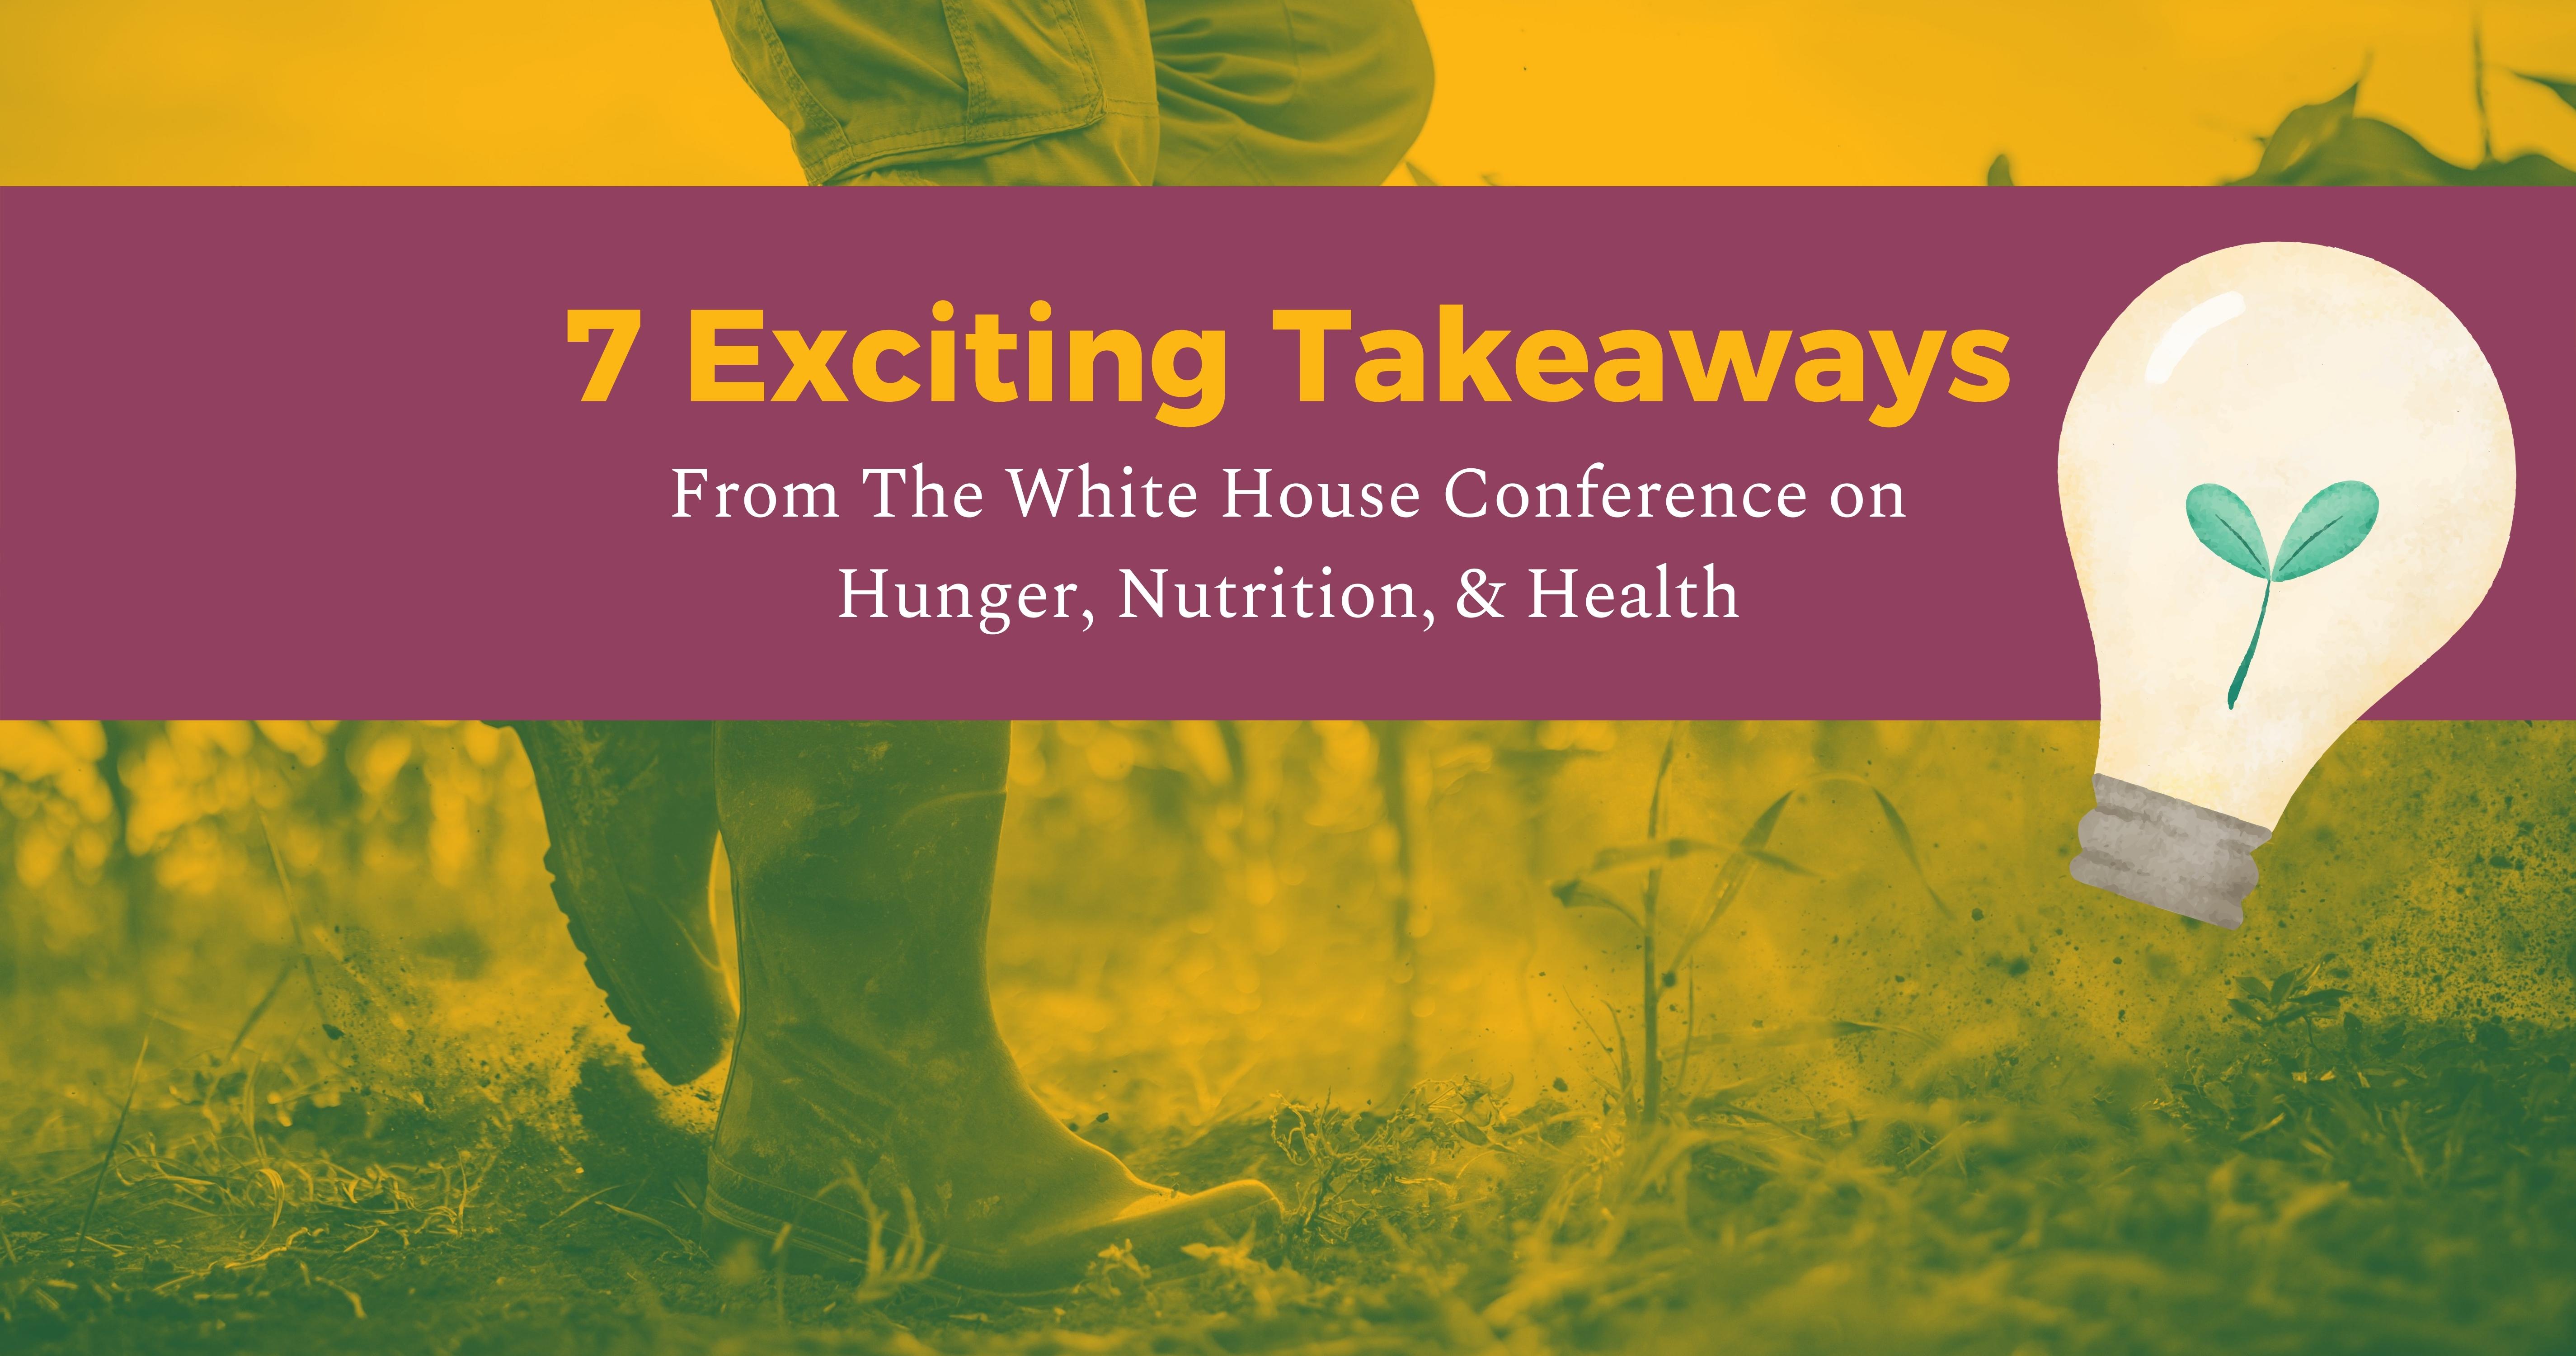 7 Exciting Takeaways From The White House Conference on Hunger, Nutrition, & Health image